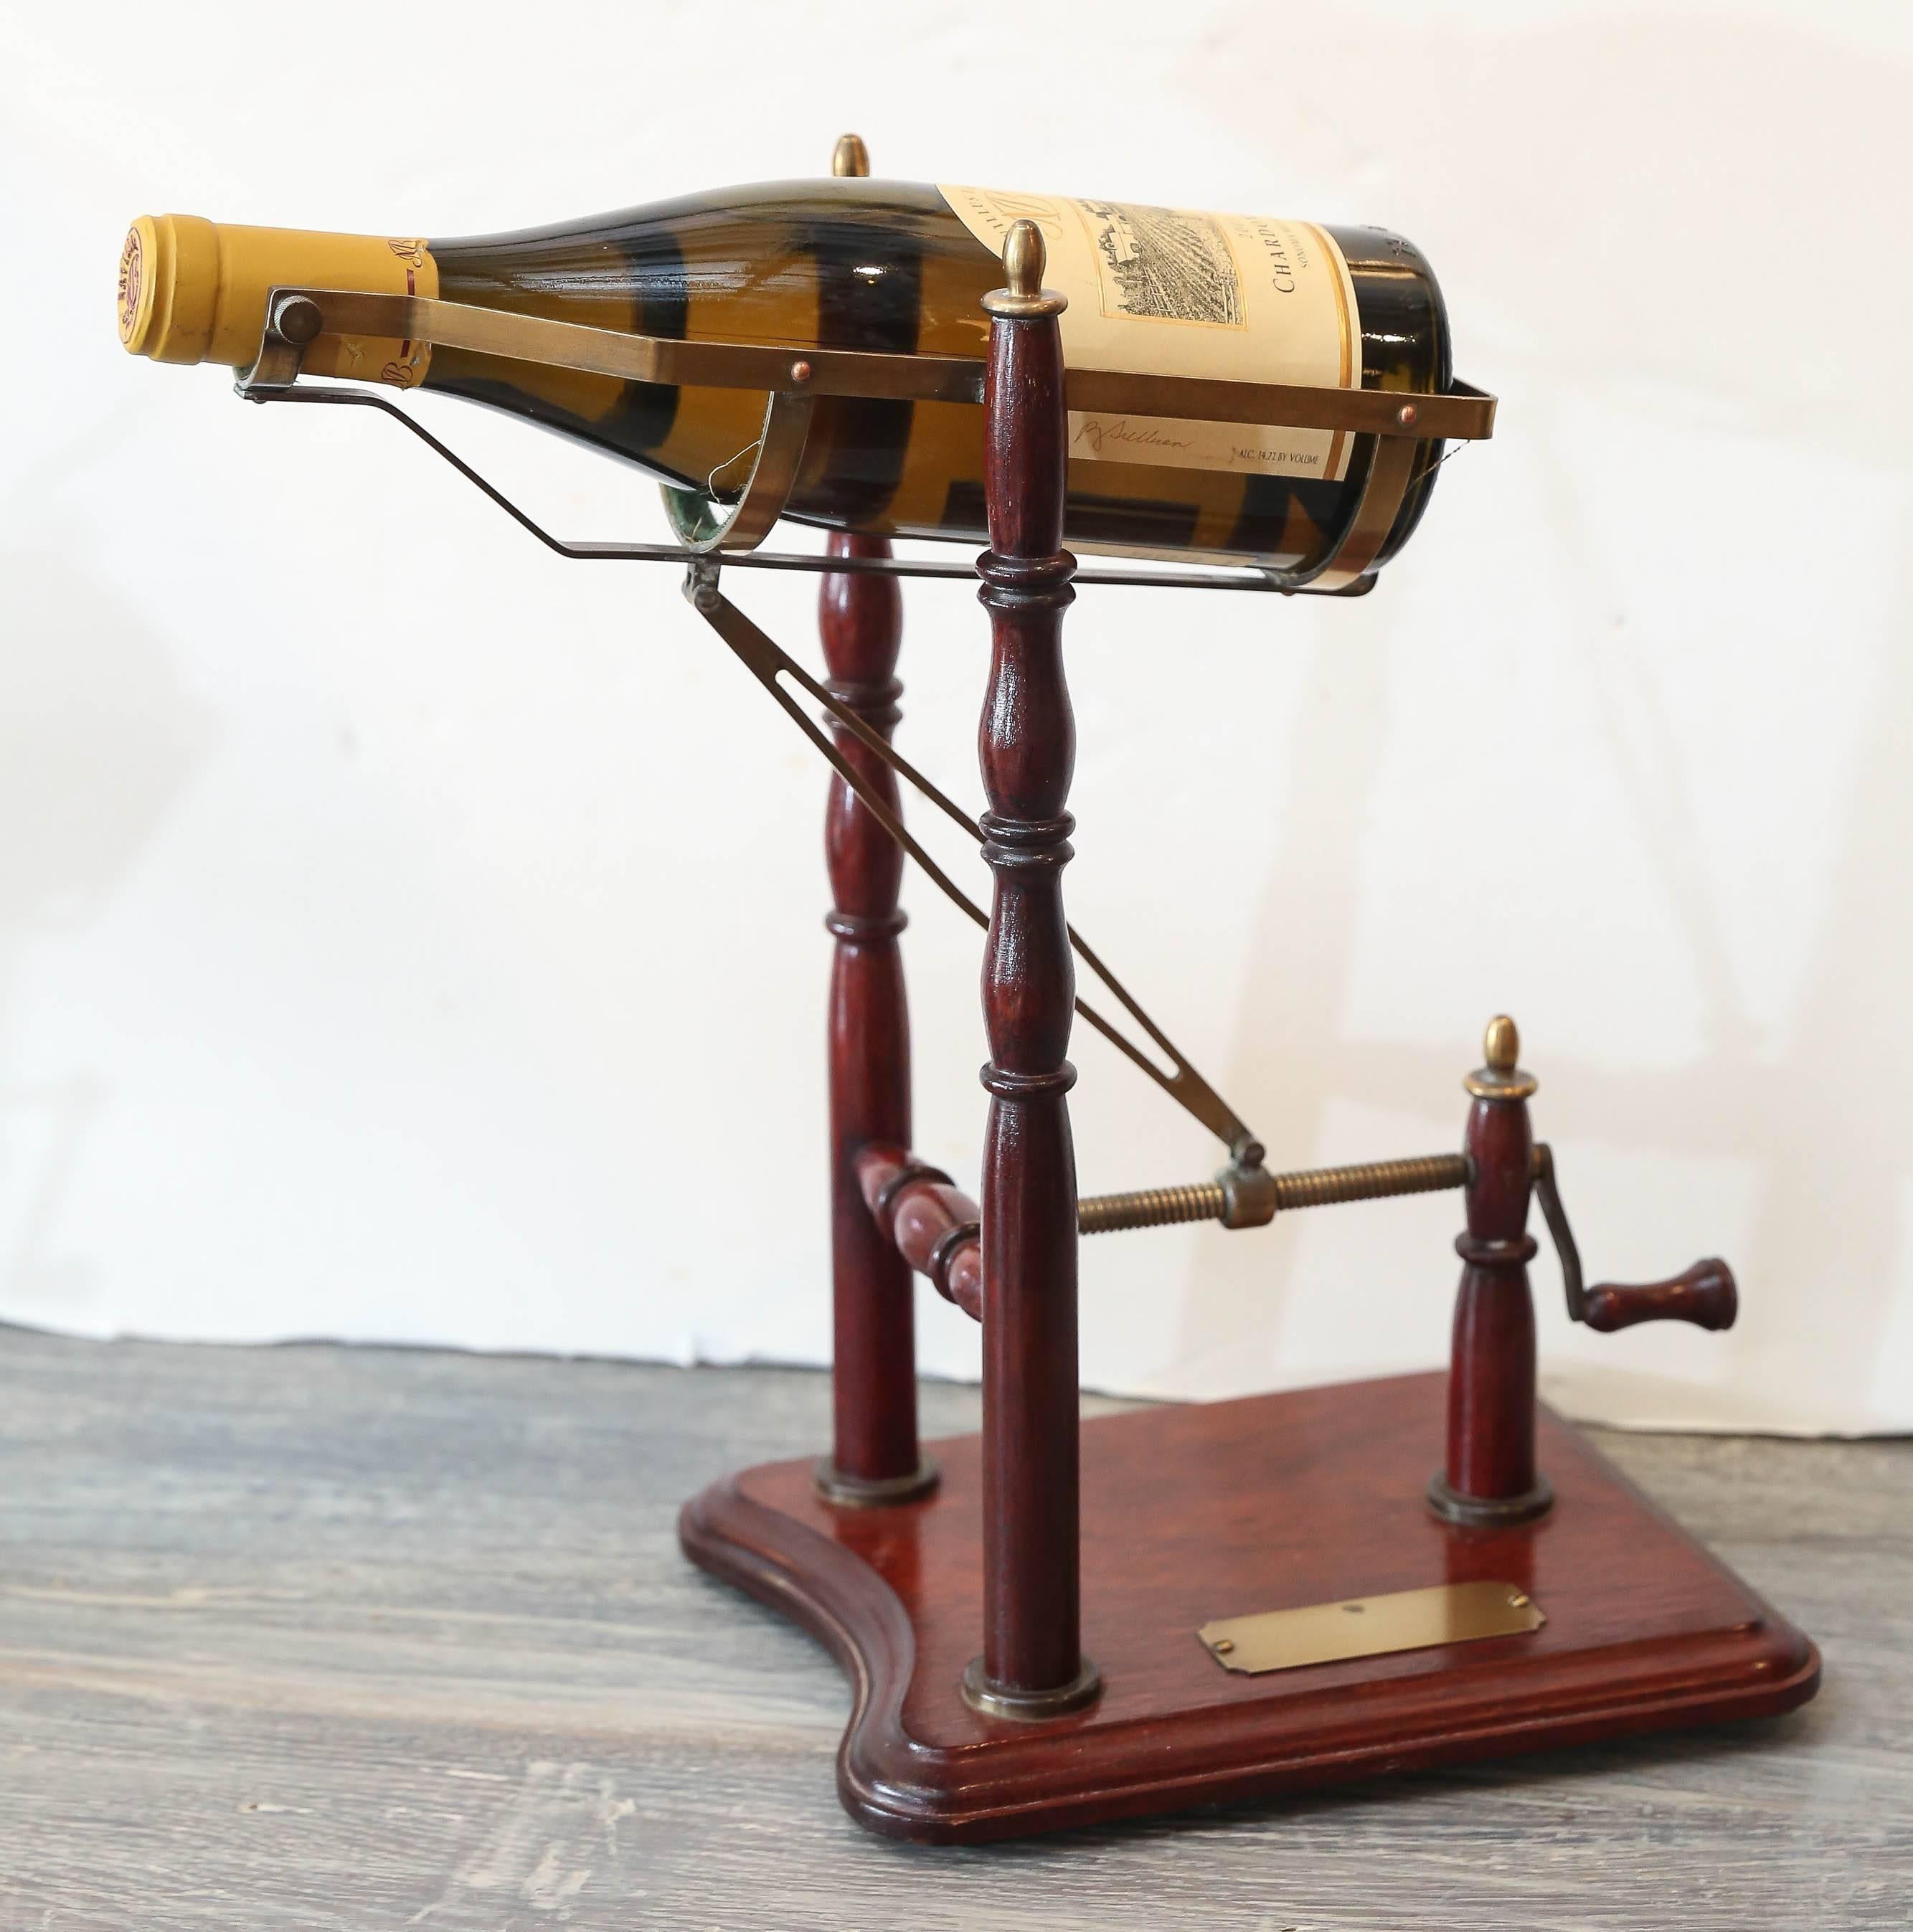 19th and 20th century mechanical wine decanters. To make sure that the sediment remained at the bottom of the bottle, these decanters help control the speed at which wine is decanted and poured. By cranking the leaver slowly the sediment remains